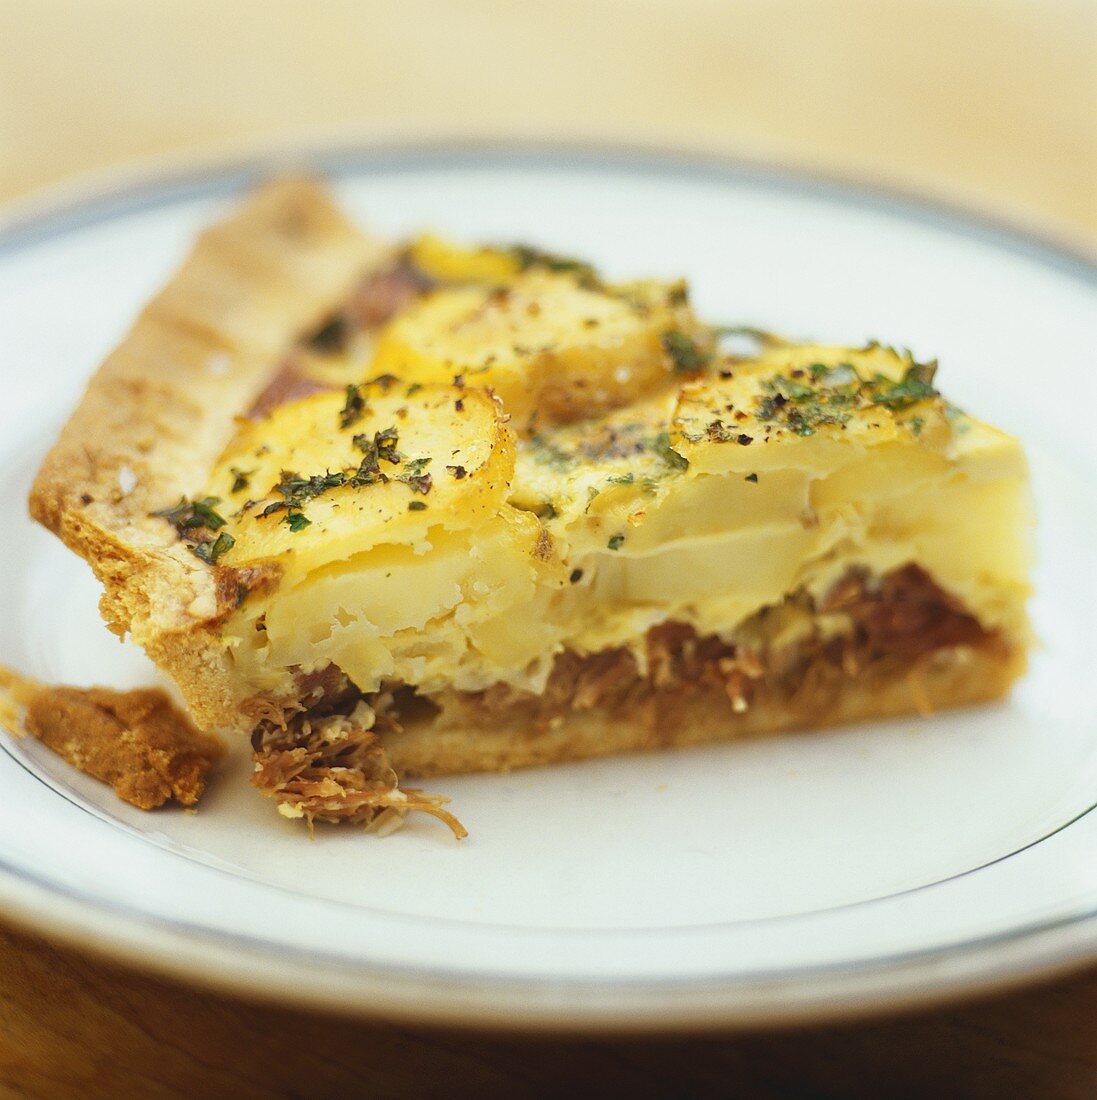 A slice of potato tart with duck confit